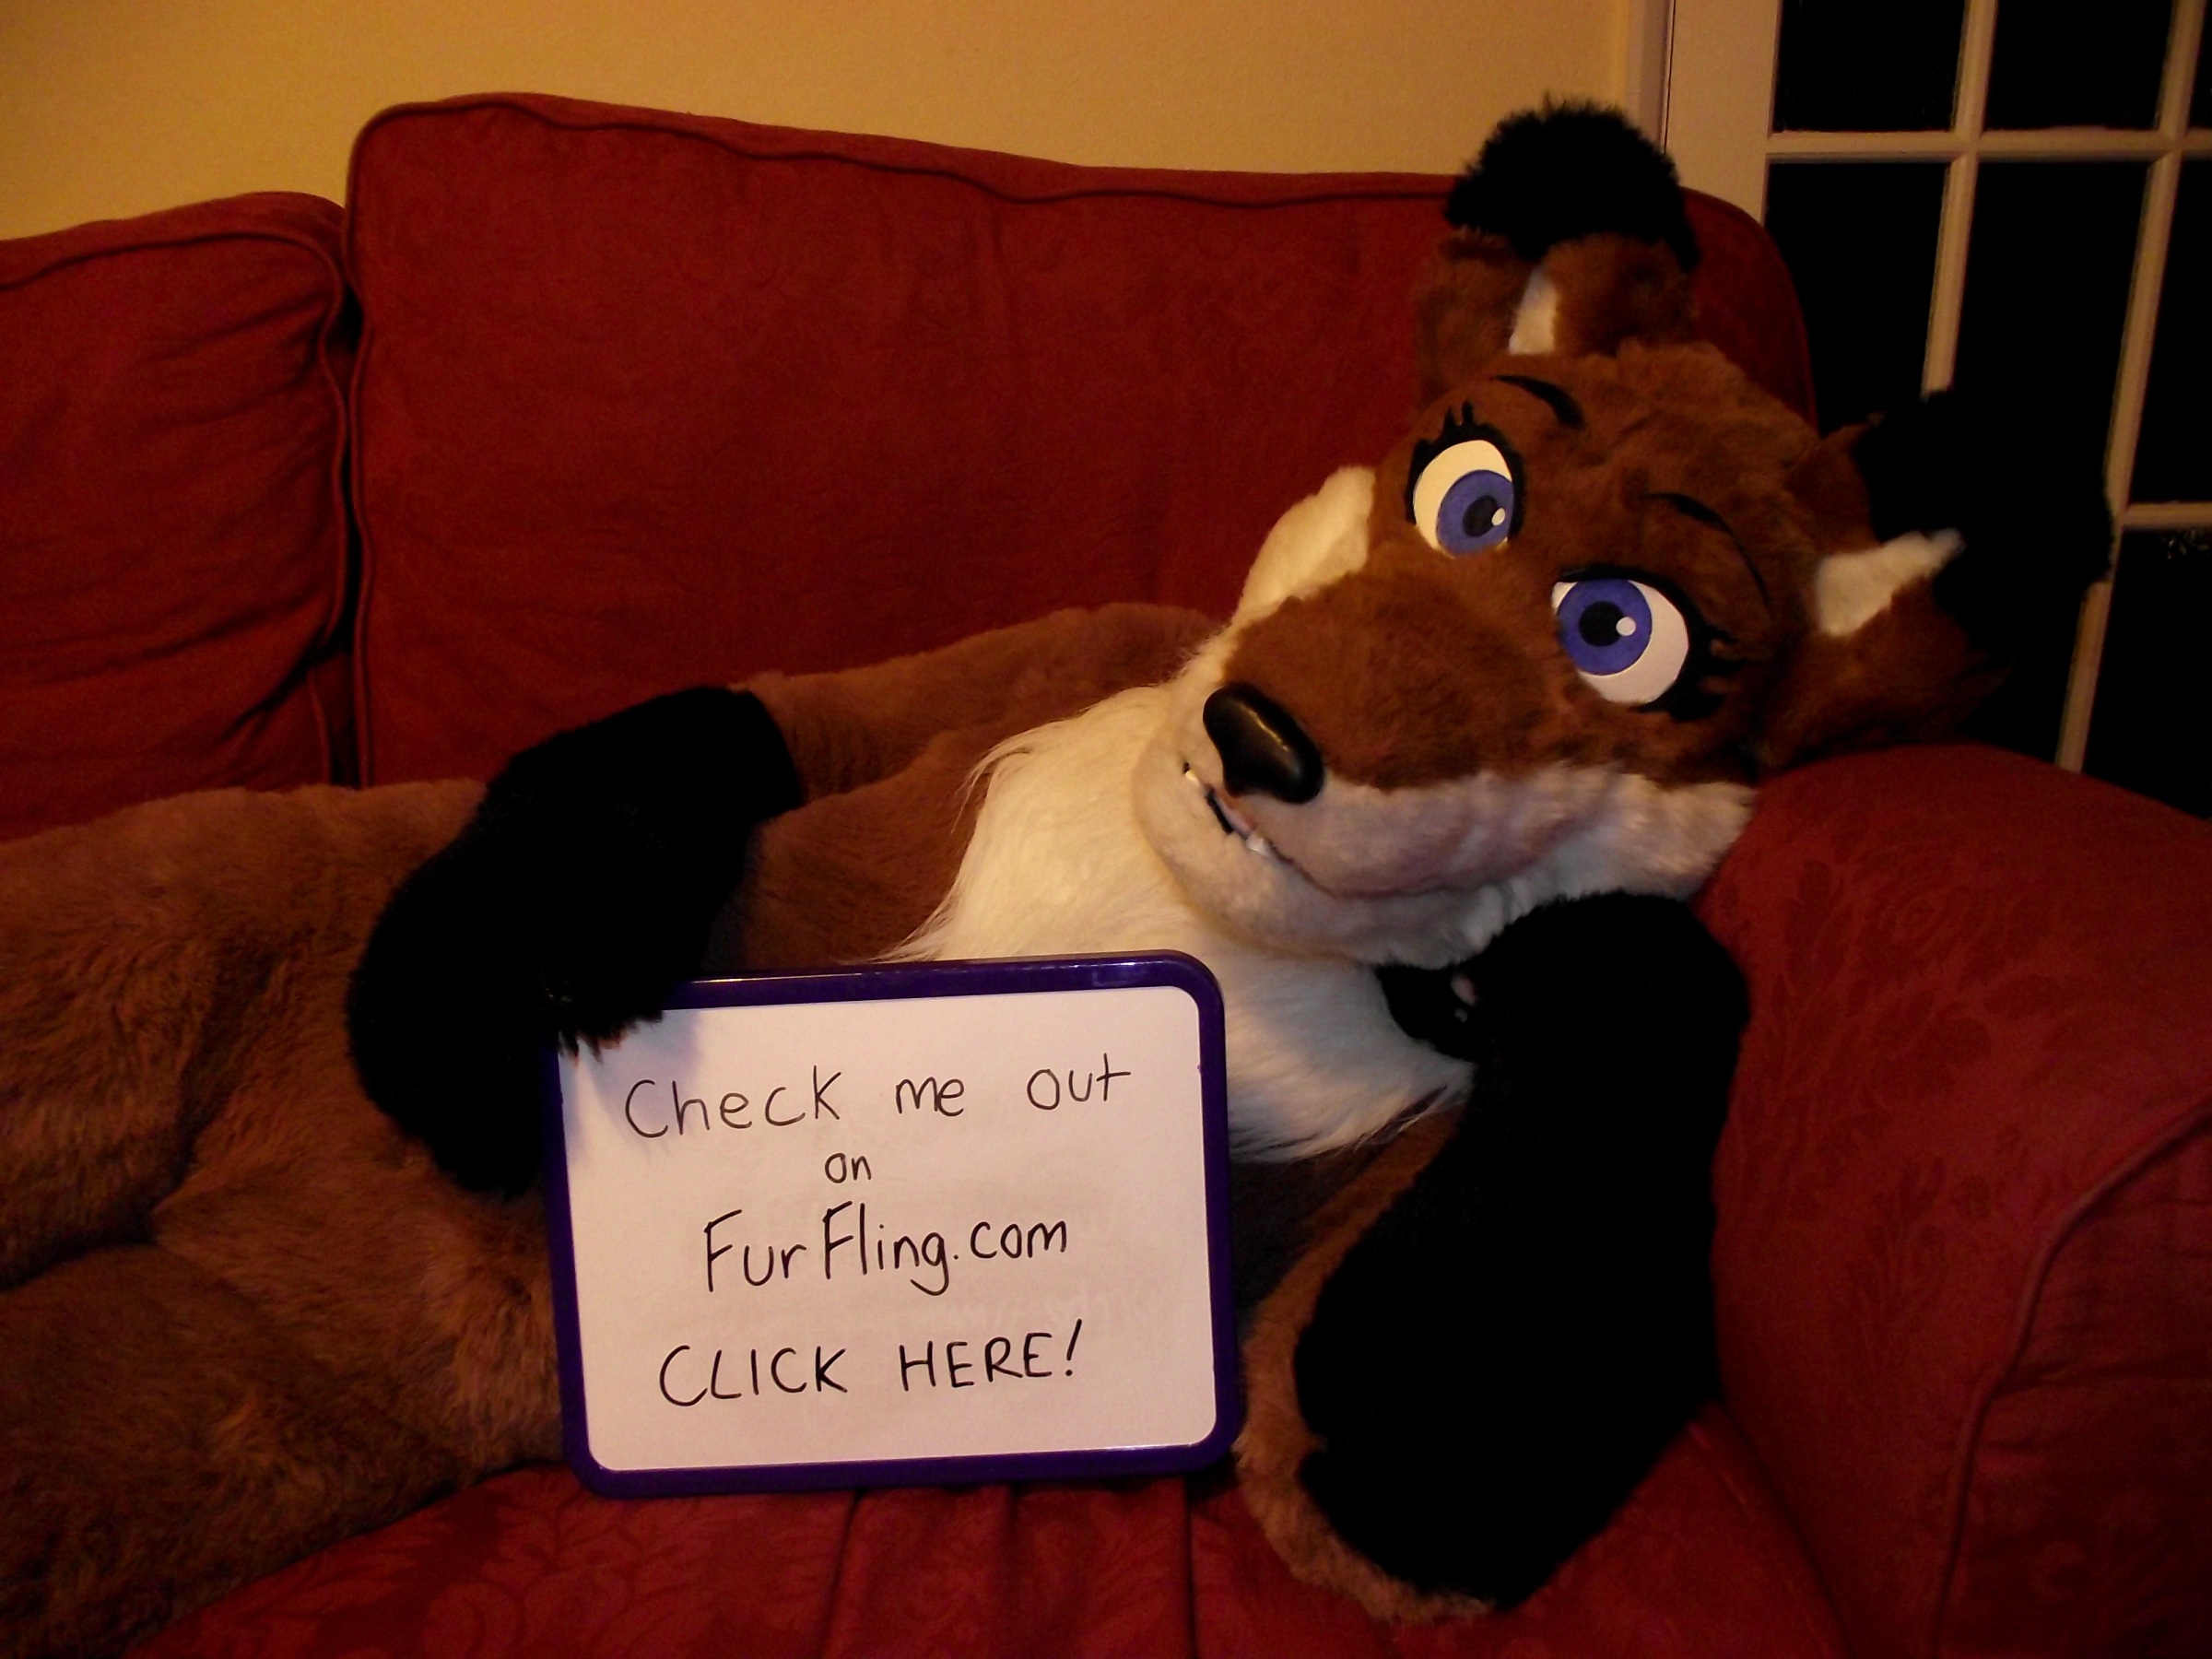 Go to FurFling if your looking to spice up your Furry life. Tons of Furs are waiting to chat with you on this Furry Dating Site.